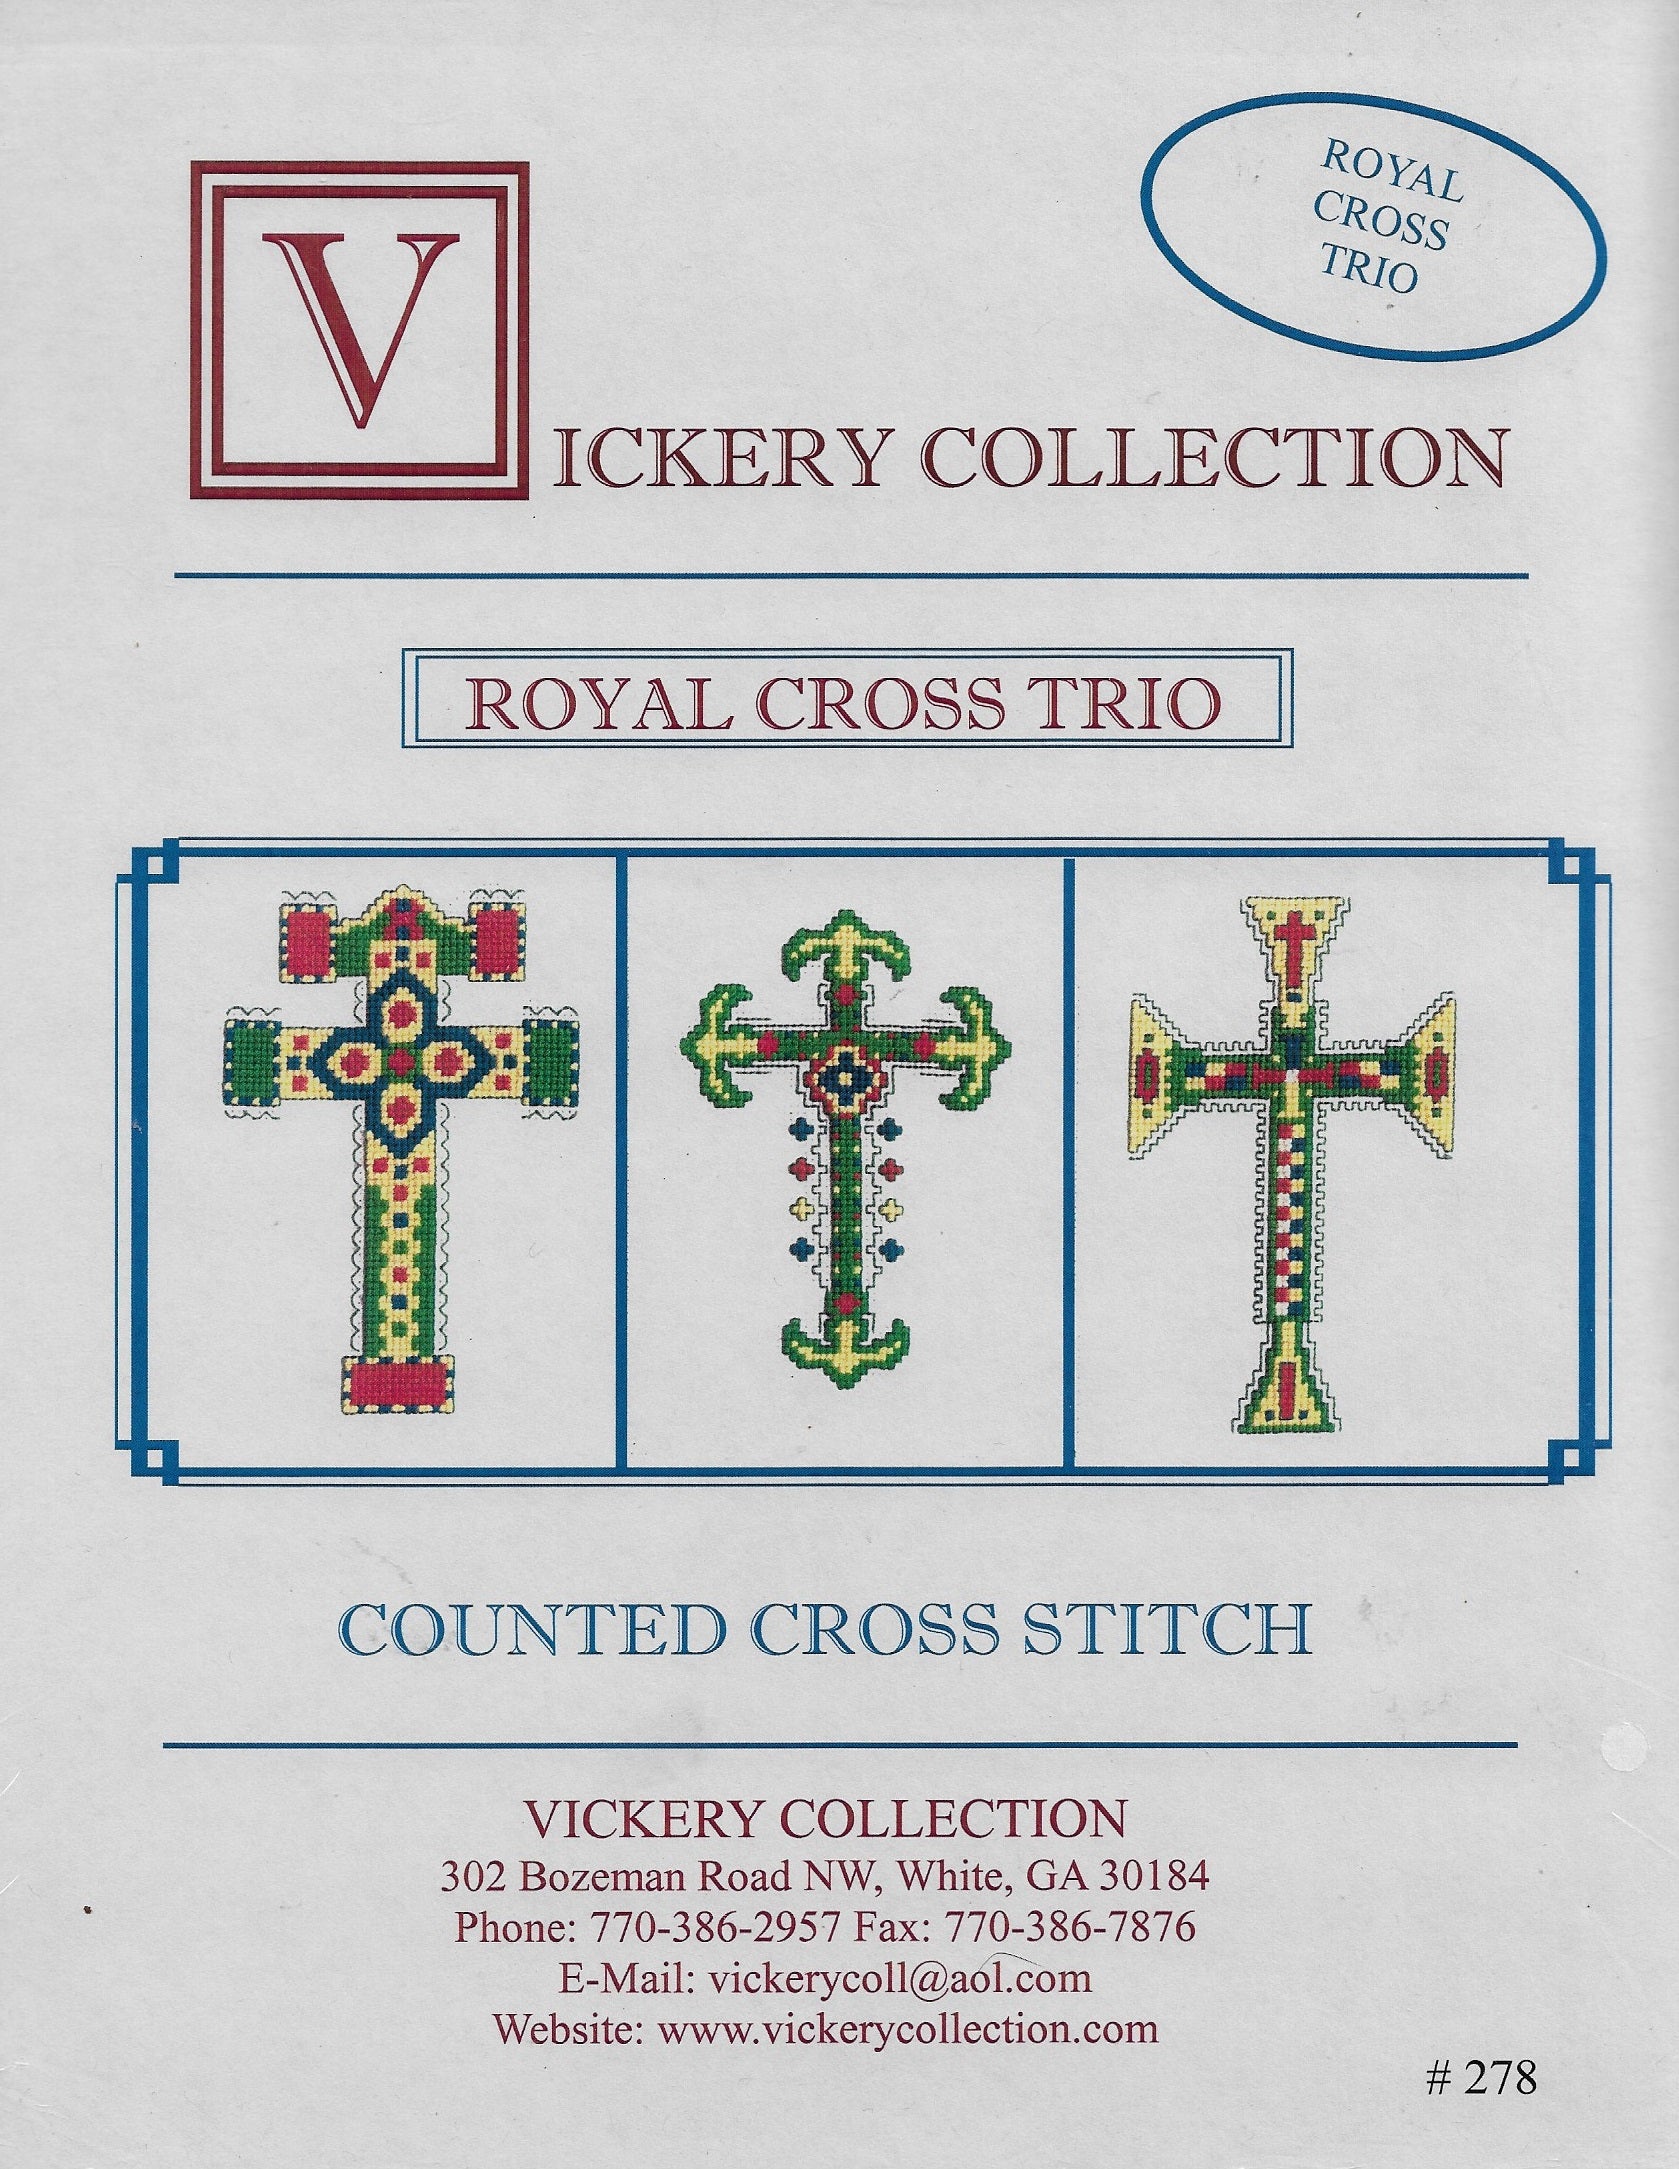 Vickery Collections Royal Cross Trio cross stitch pattern